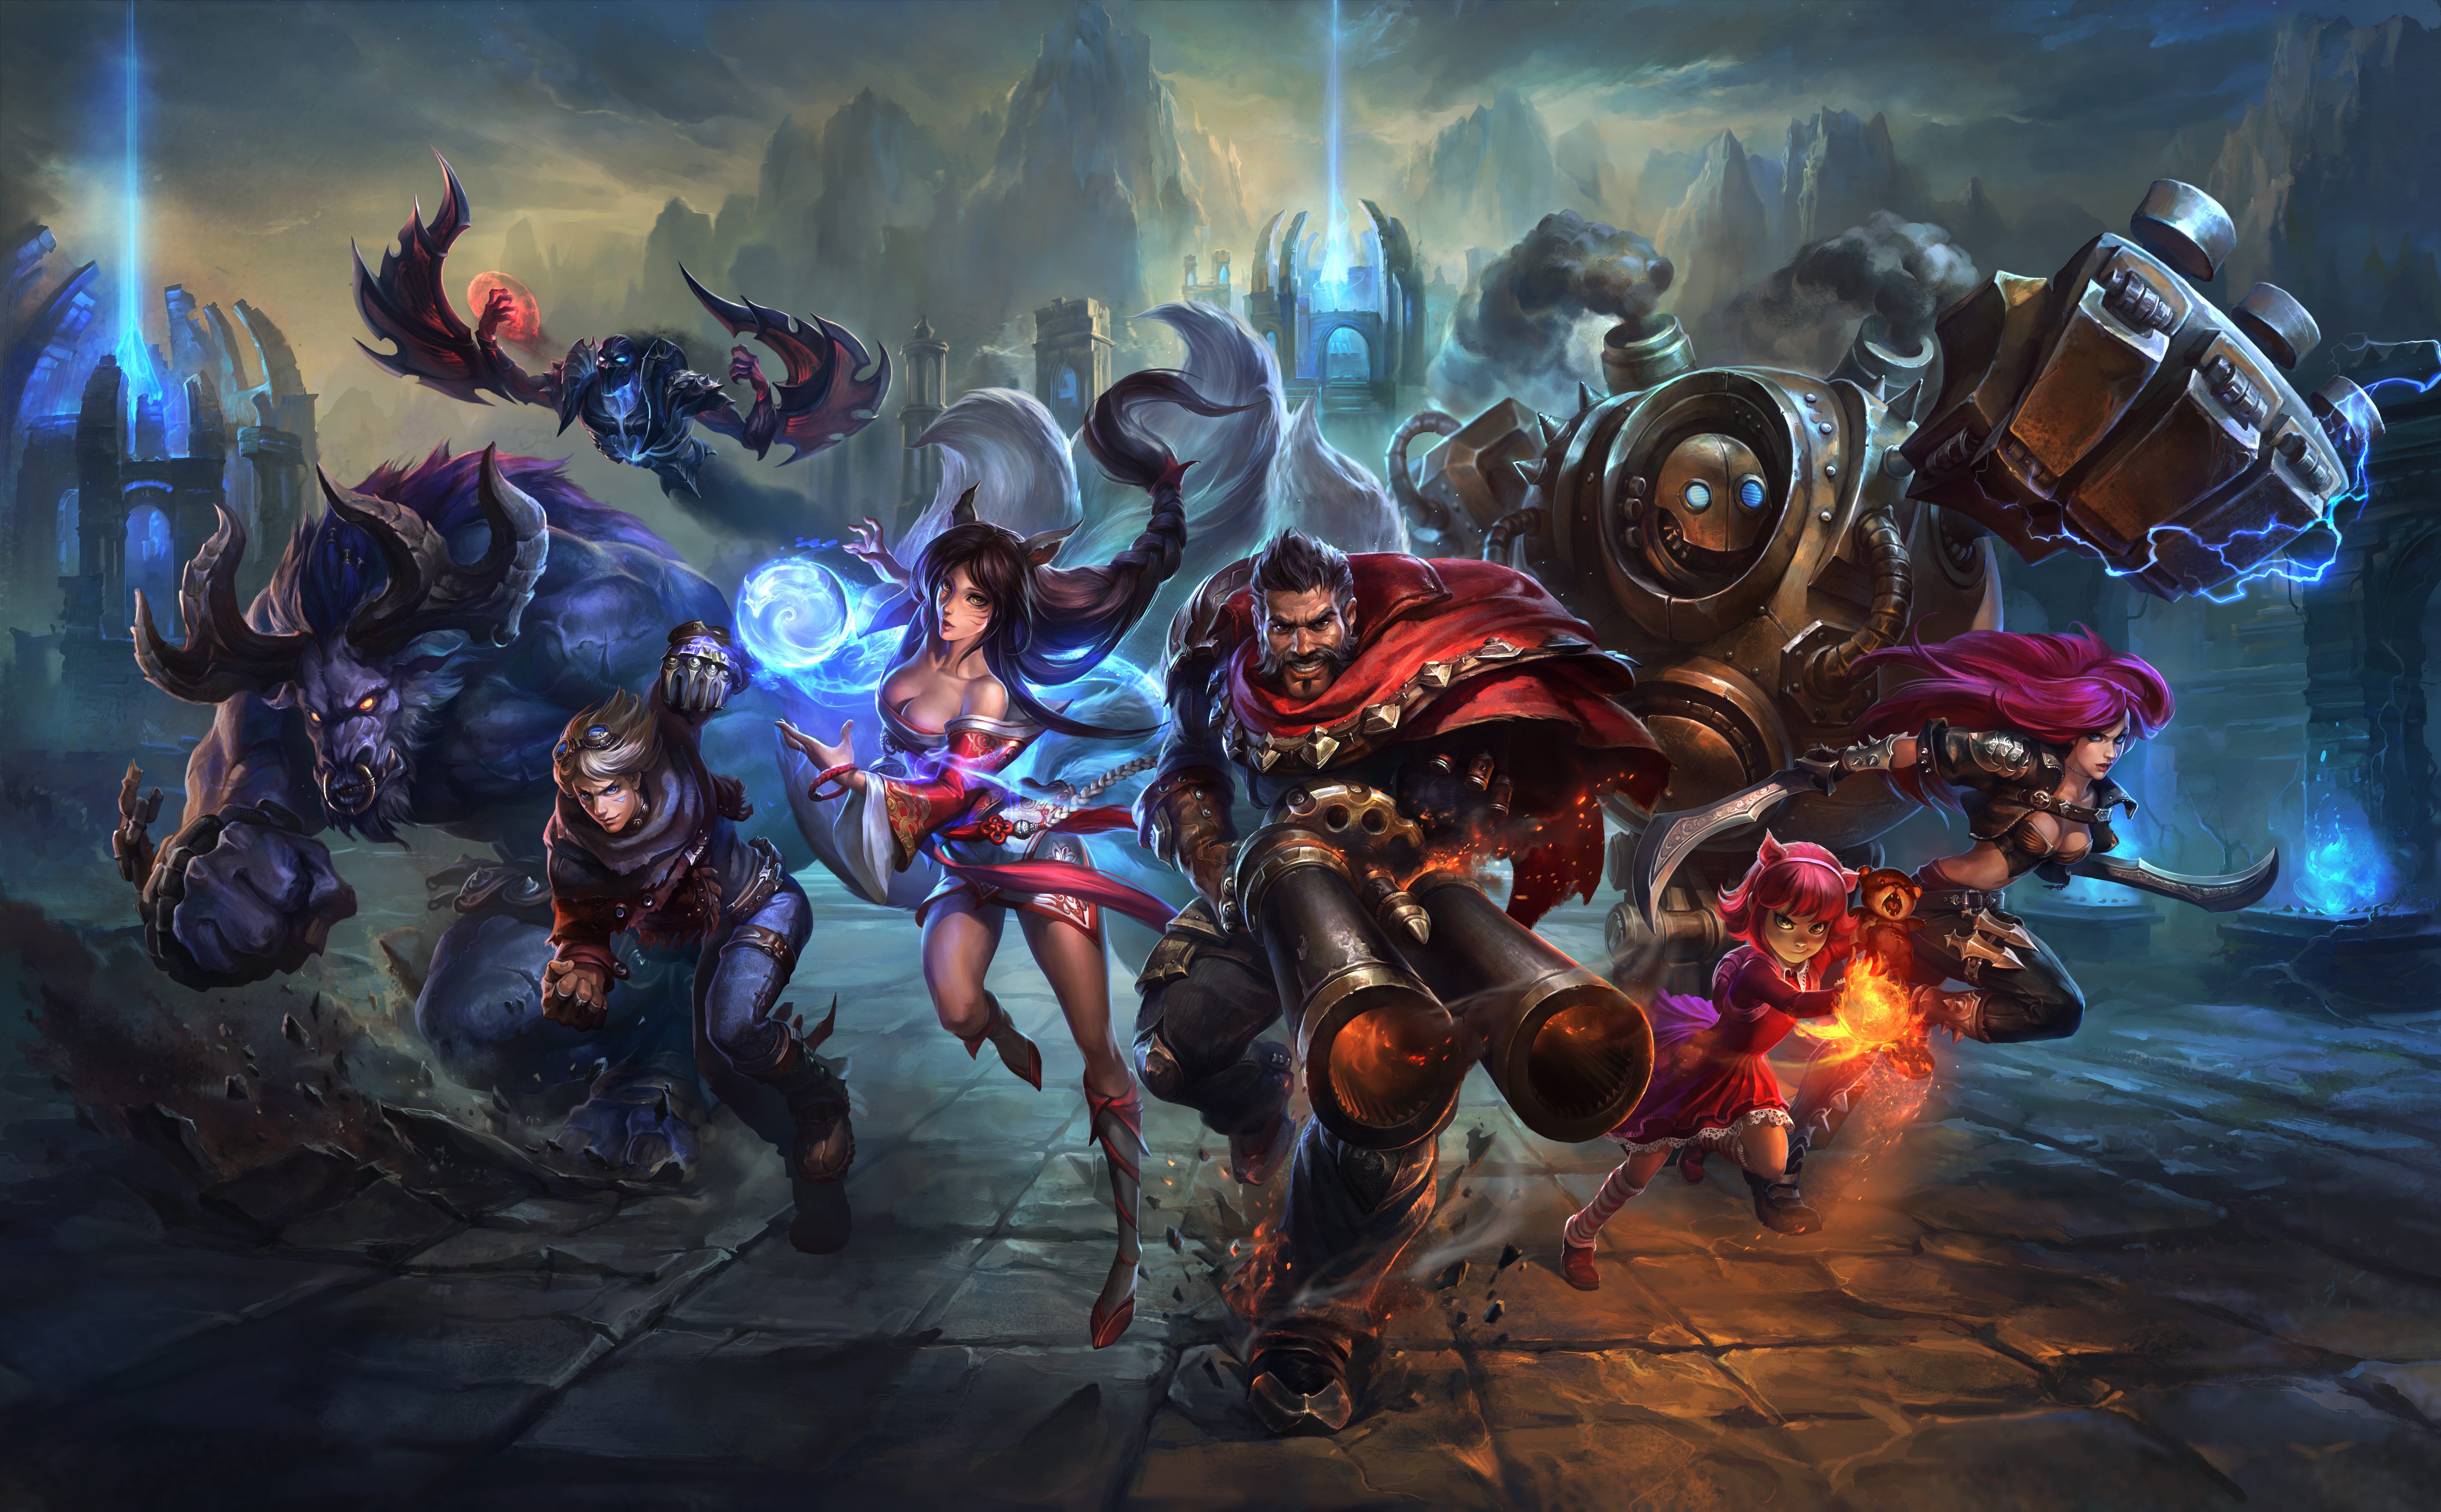 Heroes from League of Legends. Photo: Riot Games